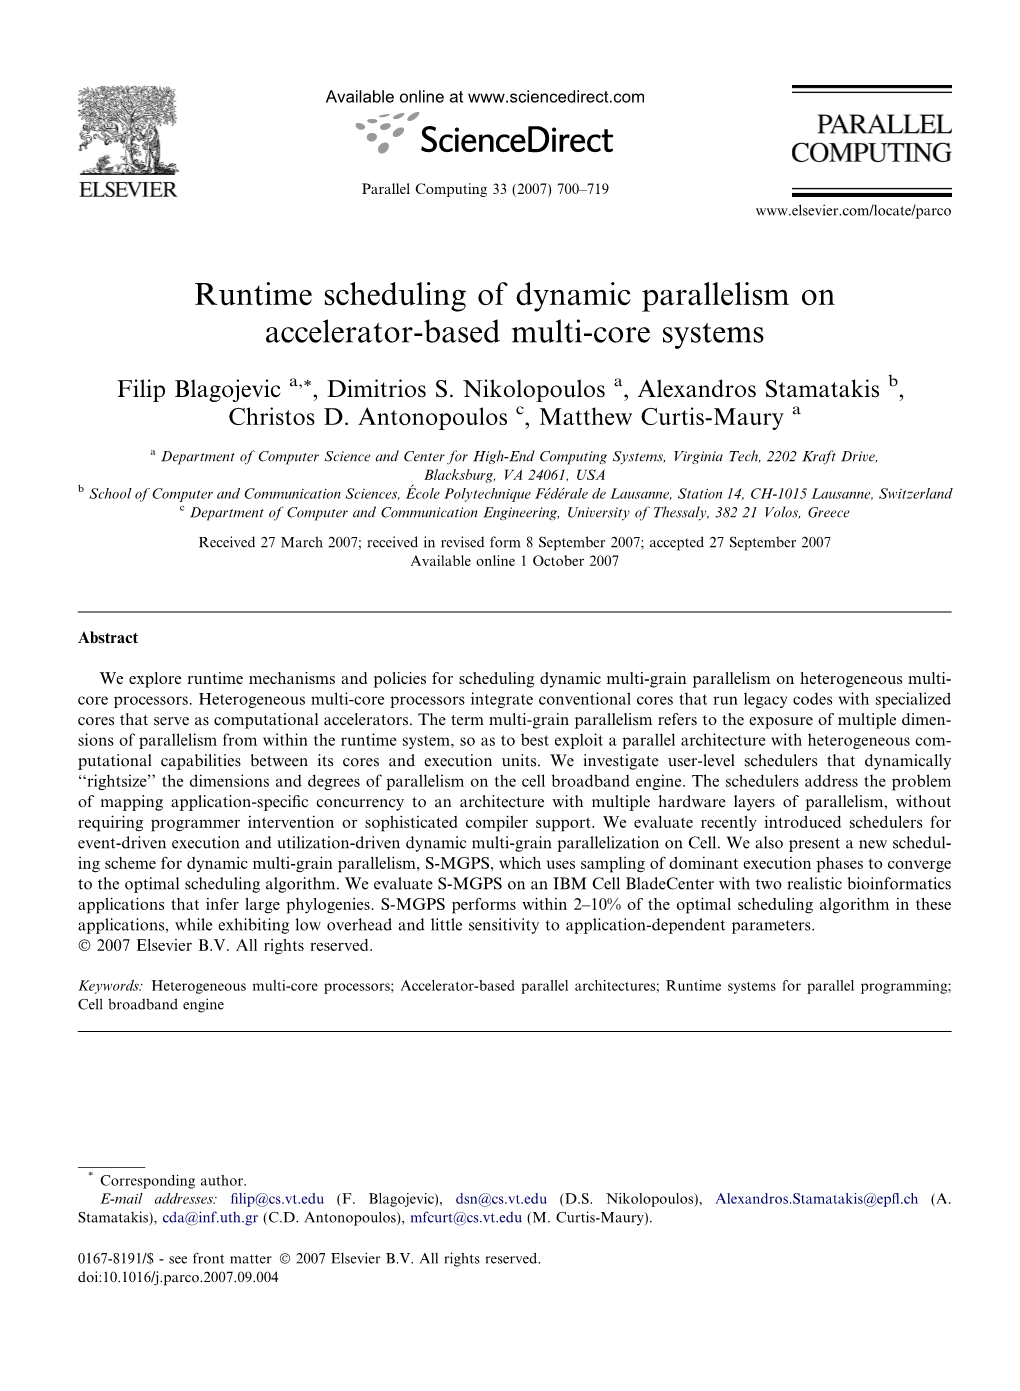 Runtime Scheduling of Dynamic Parallelism on Accelerator-Based Multi-Core Systems